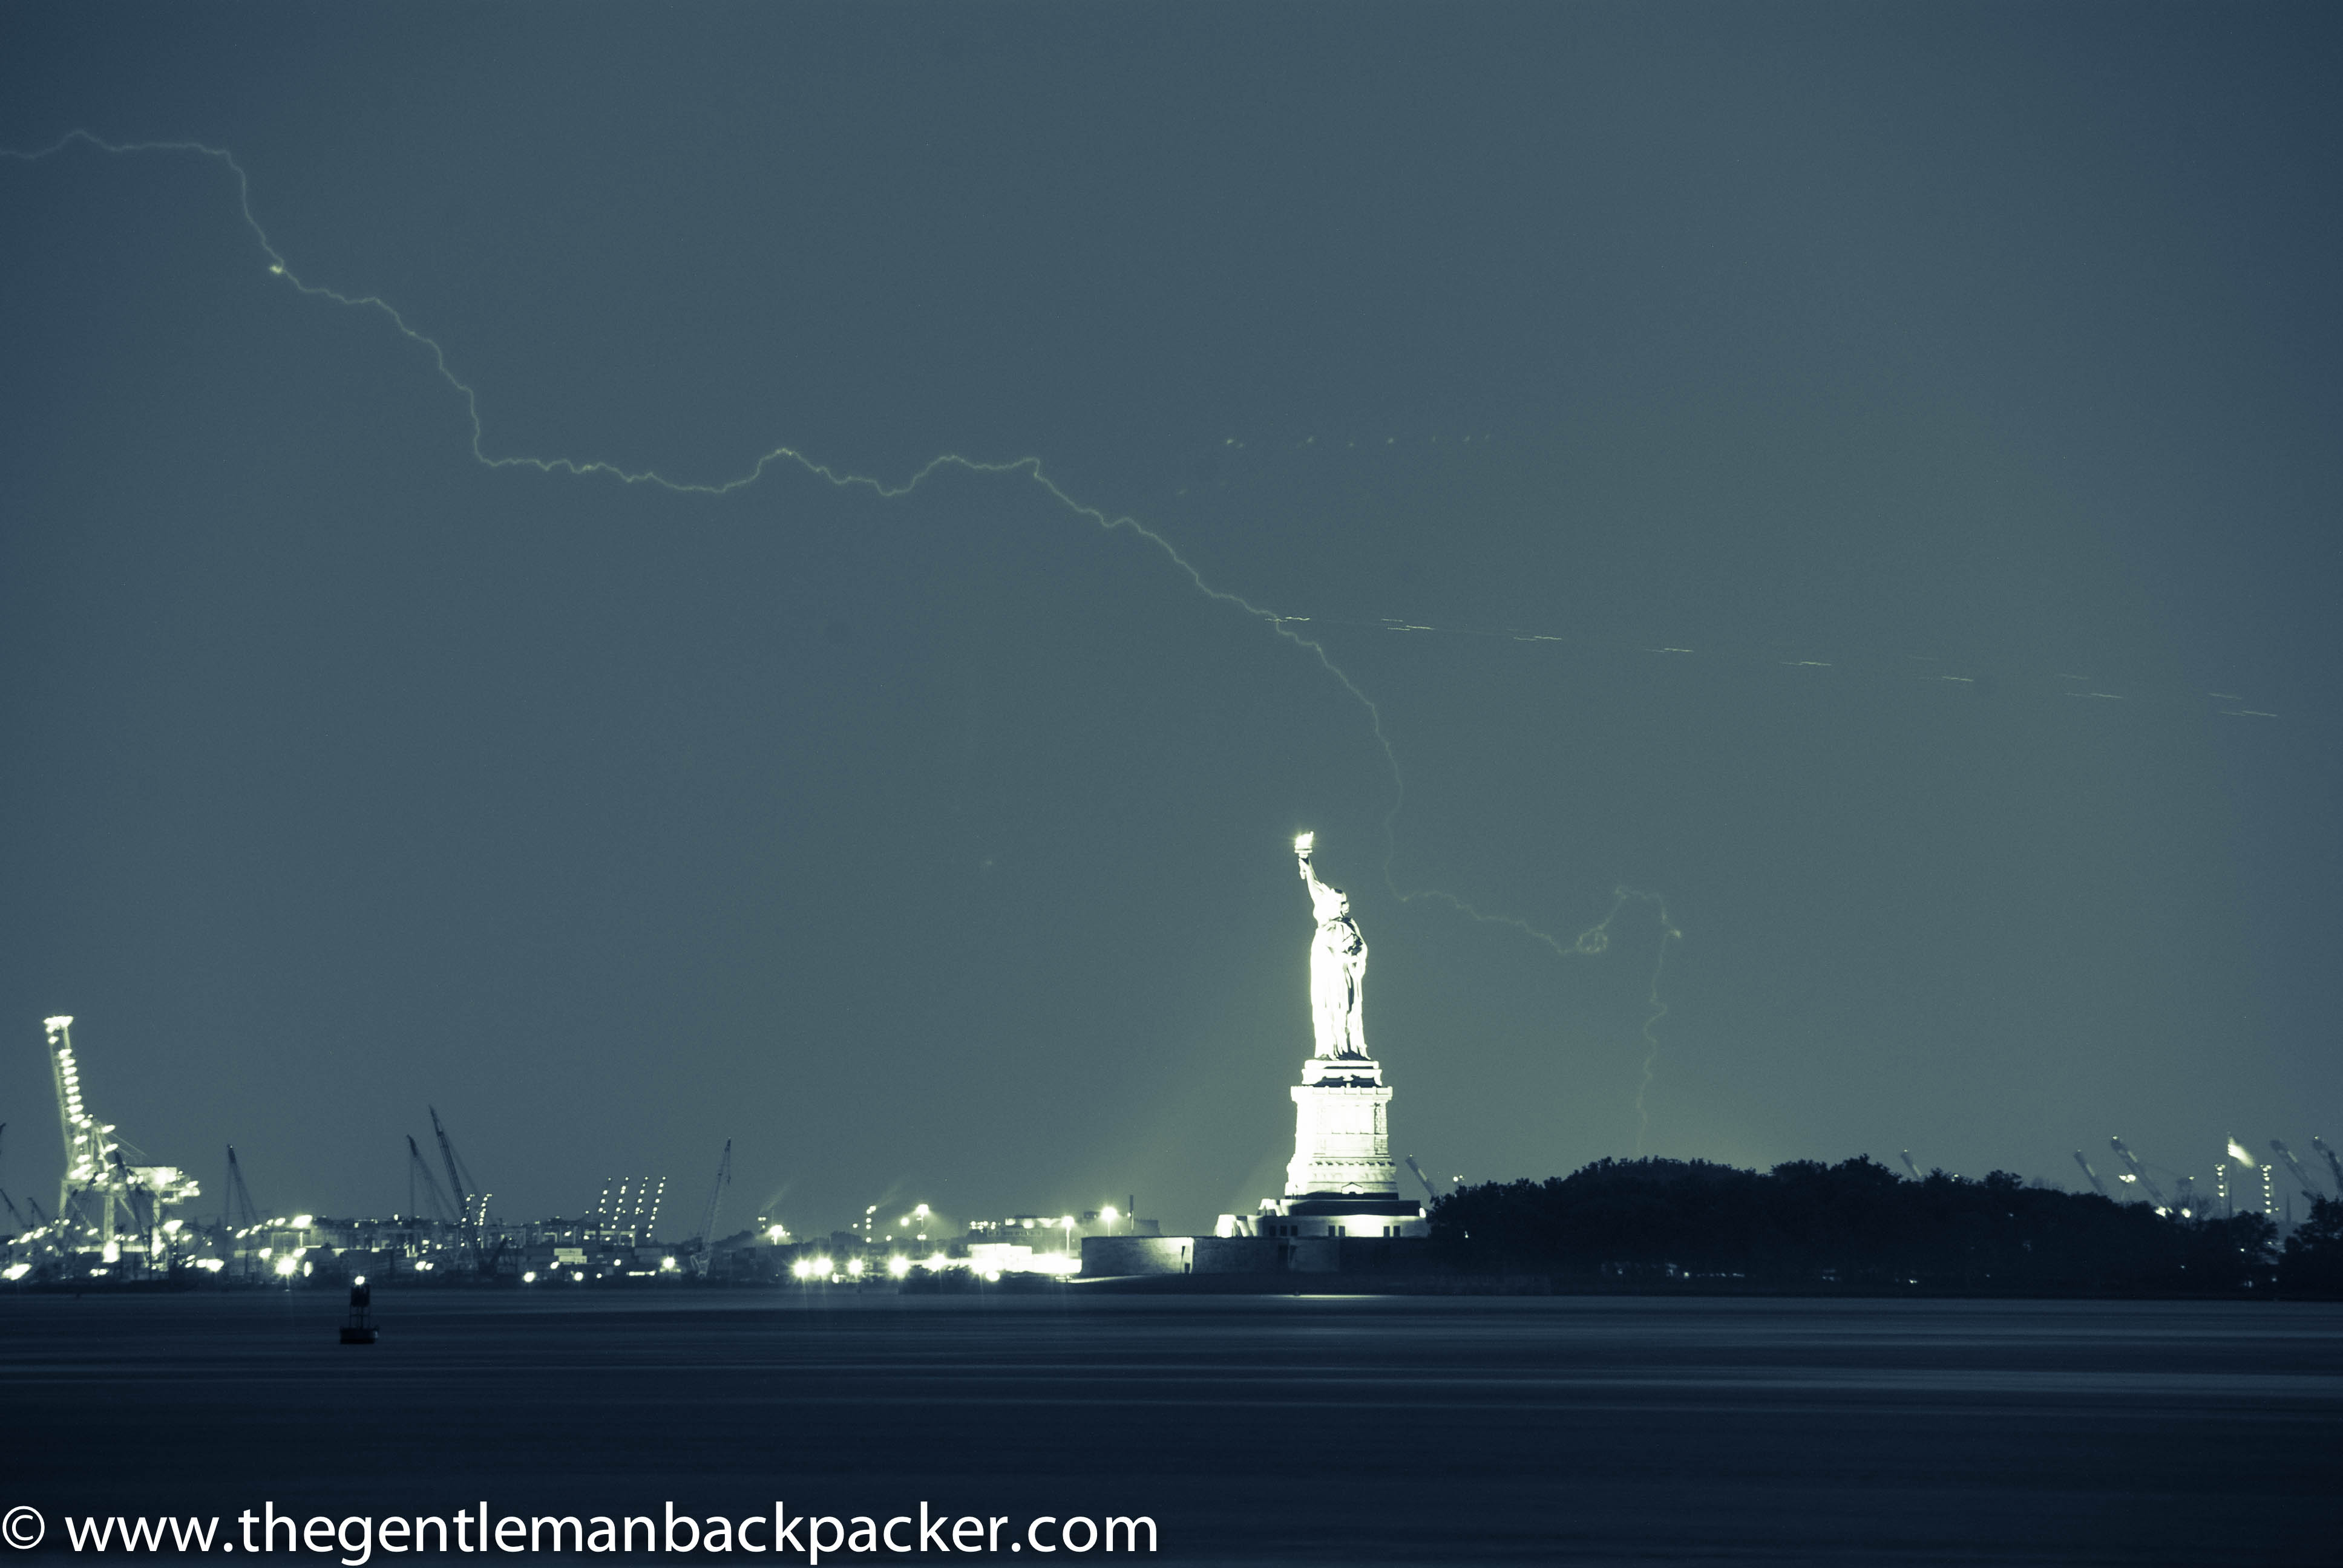 Lightning strike behind the Statue of Liberty